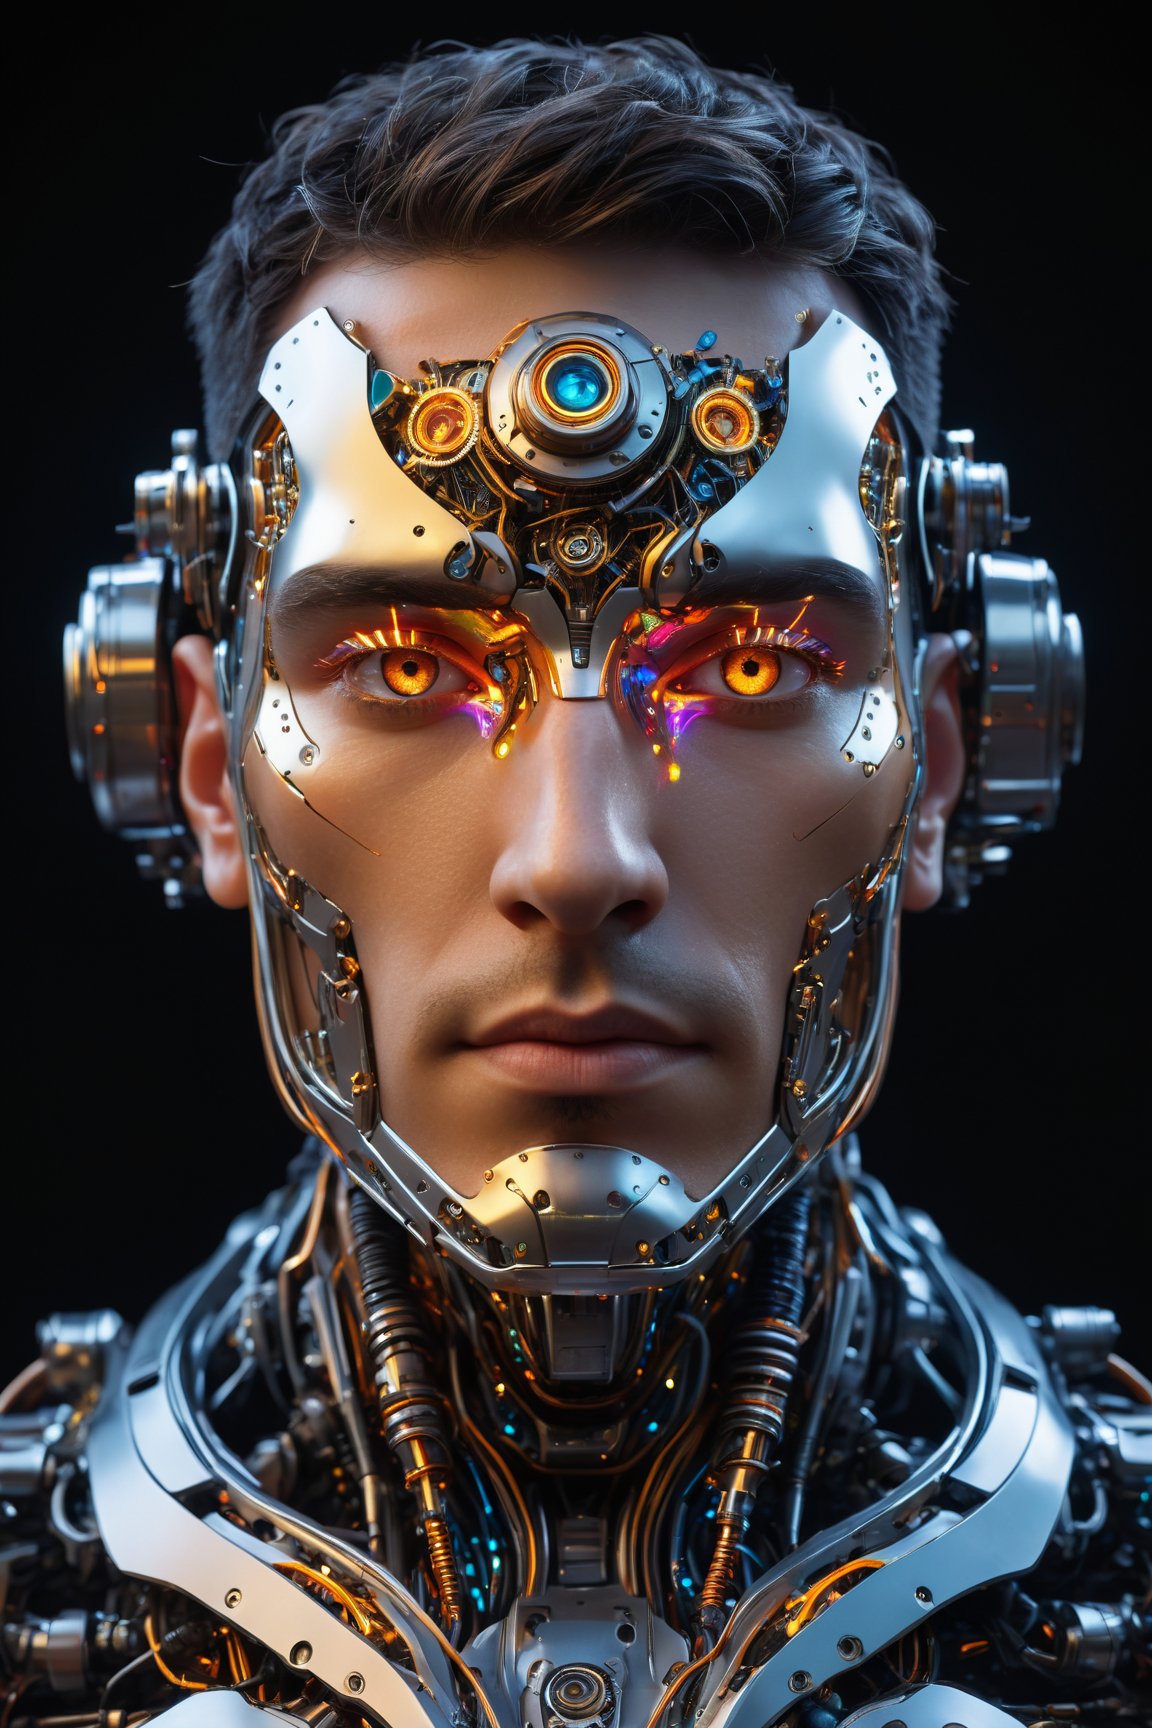 (best quality, 8K, highres, masterpiece), ultra-detailed, capturing a man with a fantastical fusion of human and machine, showcasing a robotic mechanical face and body parts that blend seamlessly into his vibrant, stainless steel skin. His eyes sparkle with a metallic sheen, enhanced by colorful glimmers and neon lights that trace the precision-engineered gears and circuitry beneath his surface. This portrayal steps into a realm where advanced technology meets the whimsical, with the dark background giving way to bursts of glowing neon accents, adding a layer of fantasy to the futuristic, industrial aesthetic. Steampunk elements weave through the design, lending an air of imaginative craftsmanship to his meticulously detailed facial features, including a digital display embedded in the forehead. The mix of human and machine is highlighted by expressive movements and a shoulder-mounted robotic arm that casts a dynamic, powerful silhouette against a canvas filled with bright, fantastical colors and soft, dream-like lighting, bringing a more vibrant, fantastical dimension to the cyborg style.